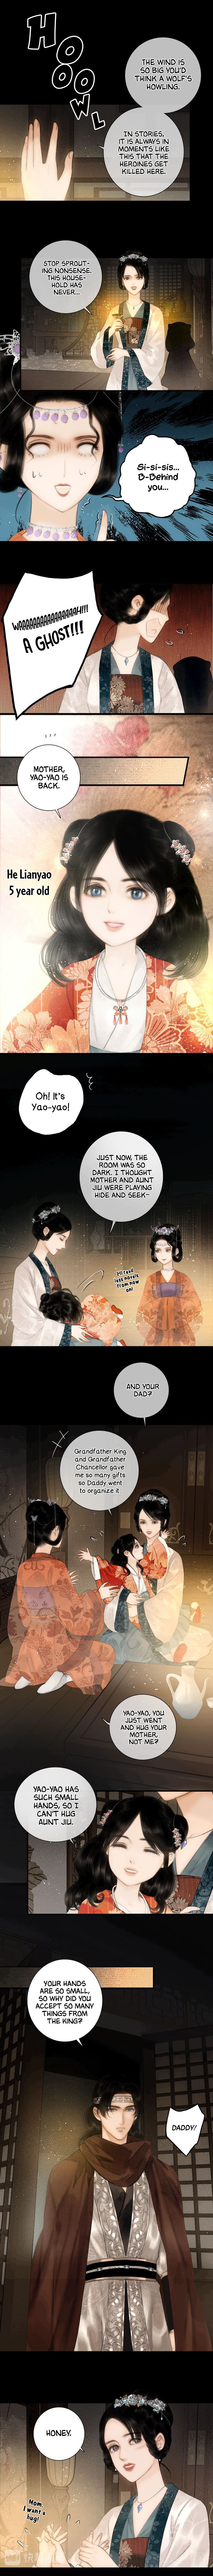 Imperial Edict Ch. 52.5 Tonight, A Flower Thief Arrives!